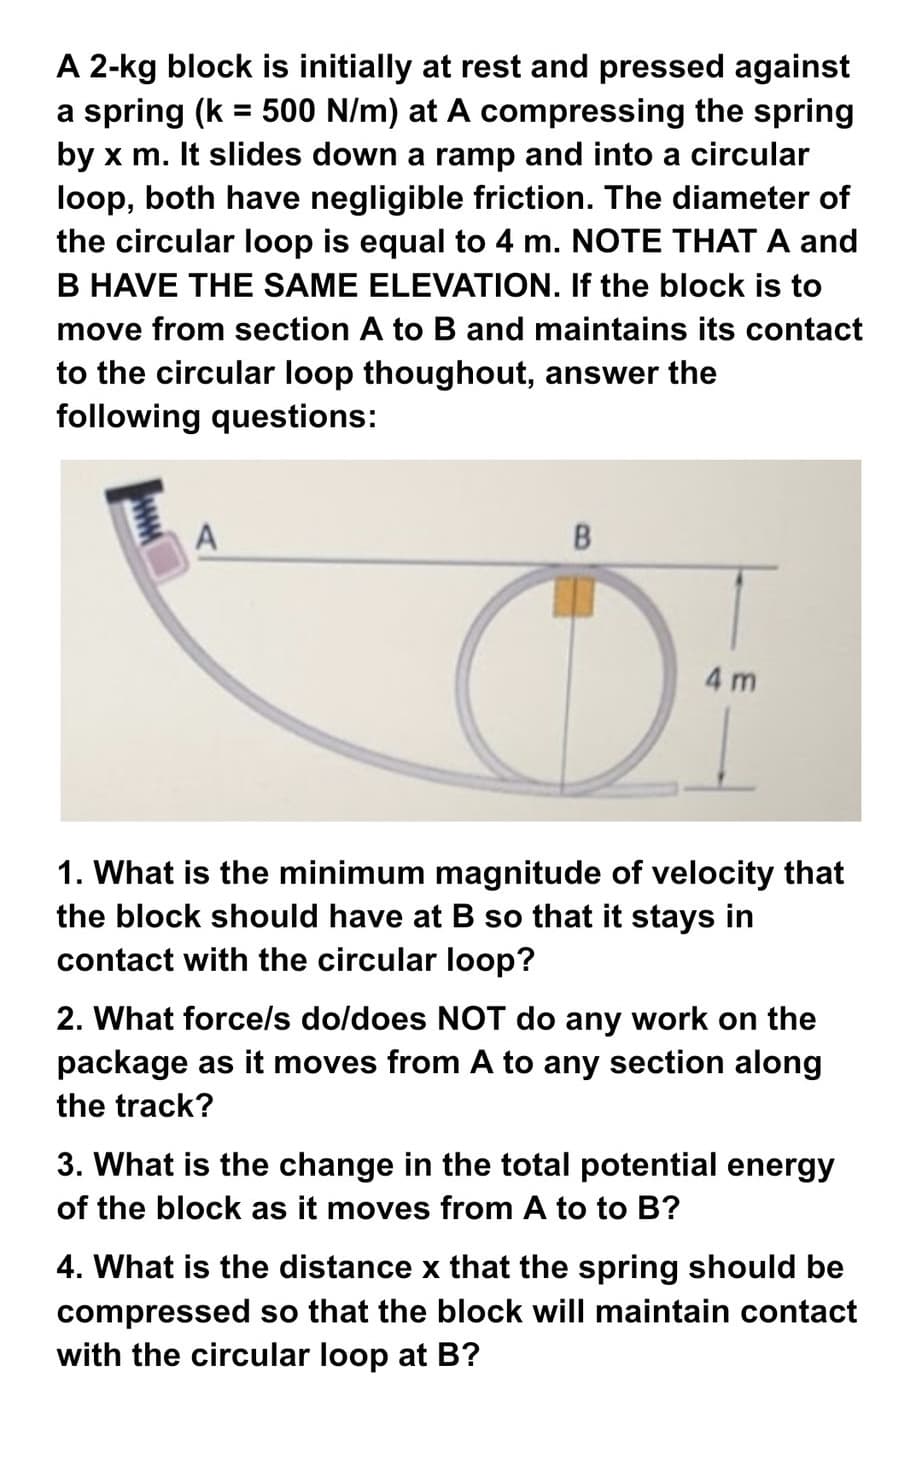 A 2-kg block is initially at rest and pressed against
a spring (k = 500 N/m) at A compressing the spring
by x m. It slides down a ramp and into a circular
loop, both have negligible friction. The diameter of
the circular loop is equal to 4 m. NOTE THAT A and
B HAVE THE SAME ELEVATION. If the block is to
move from section A to B and maintains its contact
to the circular loop thoughout, answer the
following questions:
A
B
4 m
1. What is the minimum magnitude of velocity that
the block should have at B so that it stays in
contact with the circular loop?
2. What force/s do/does NOT do any work on the
package as it moves from A to any section along
the track?
3. What is the change in the total potential energy
of the block as it moves from A to to B?
4. What is the distance x that the spring should be
compressed so that the block will maintain contact
with the circular loop at B?
